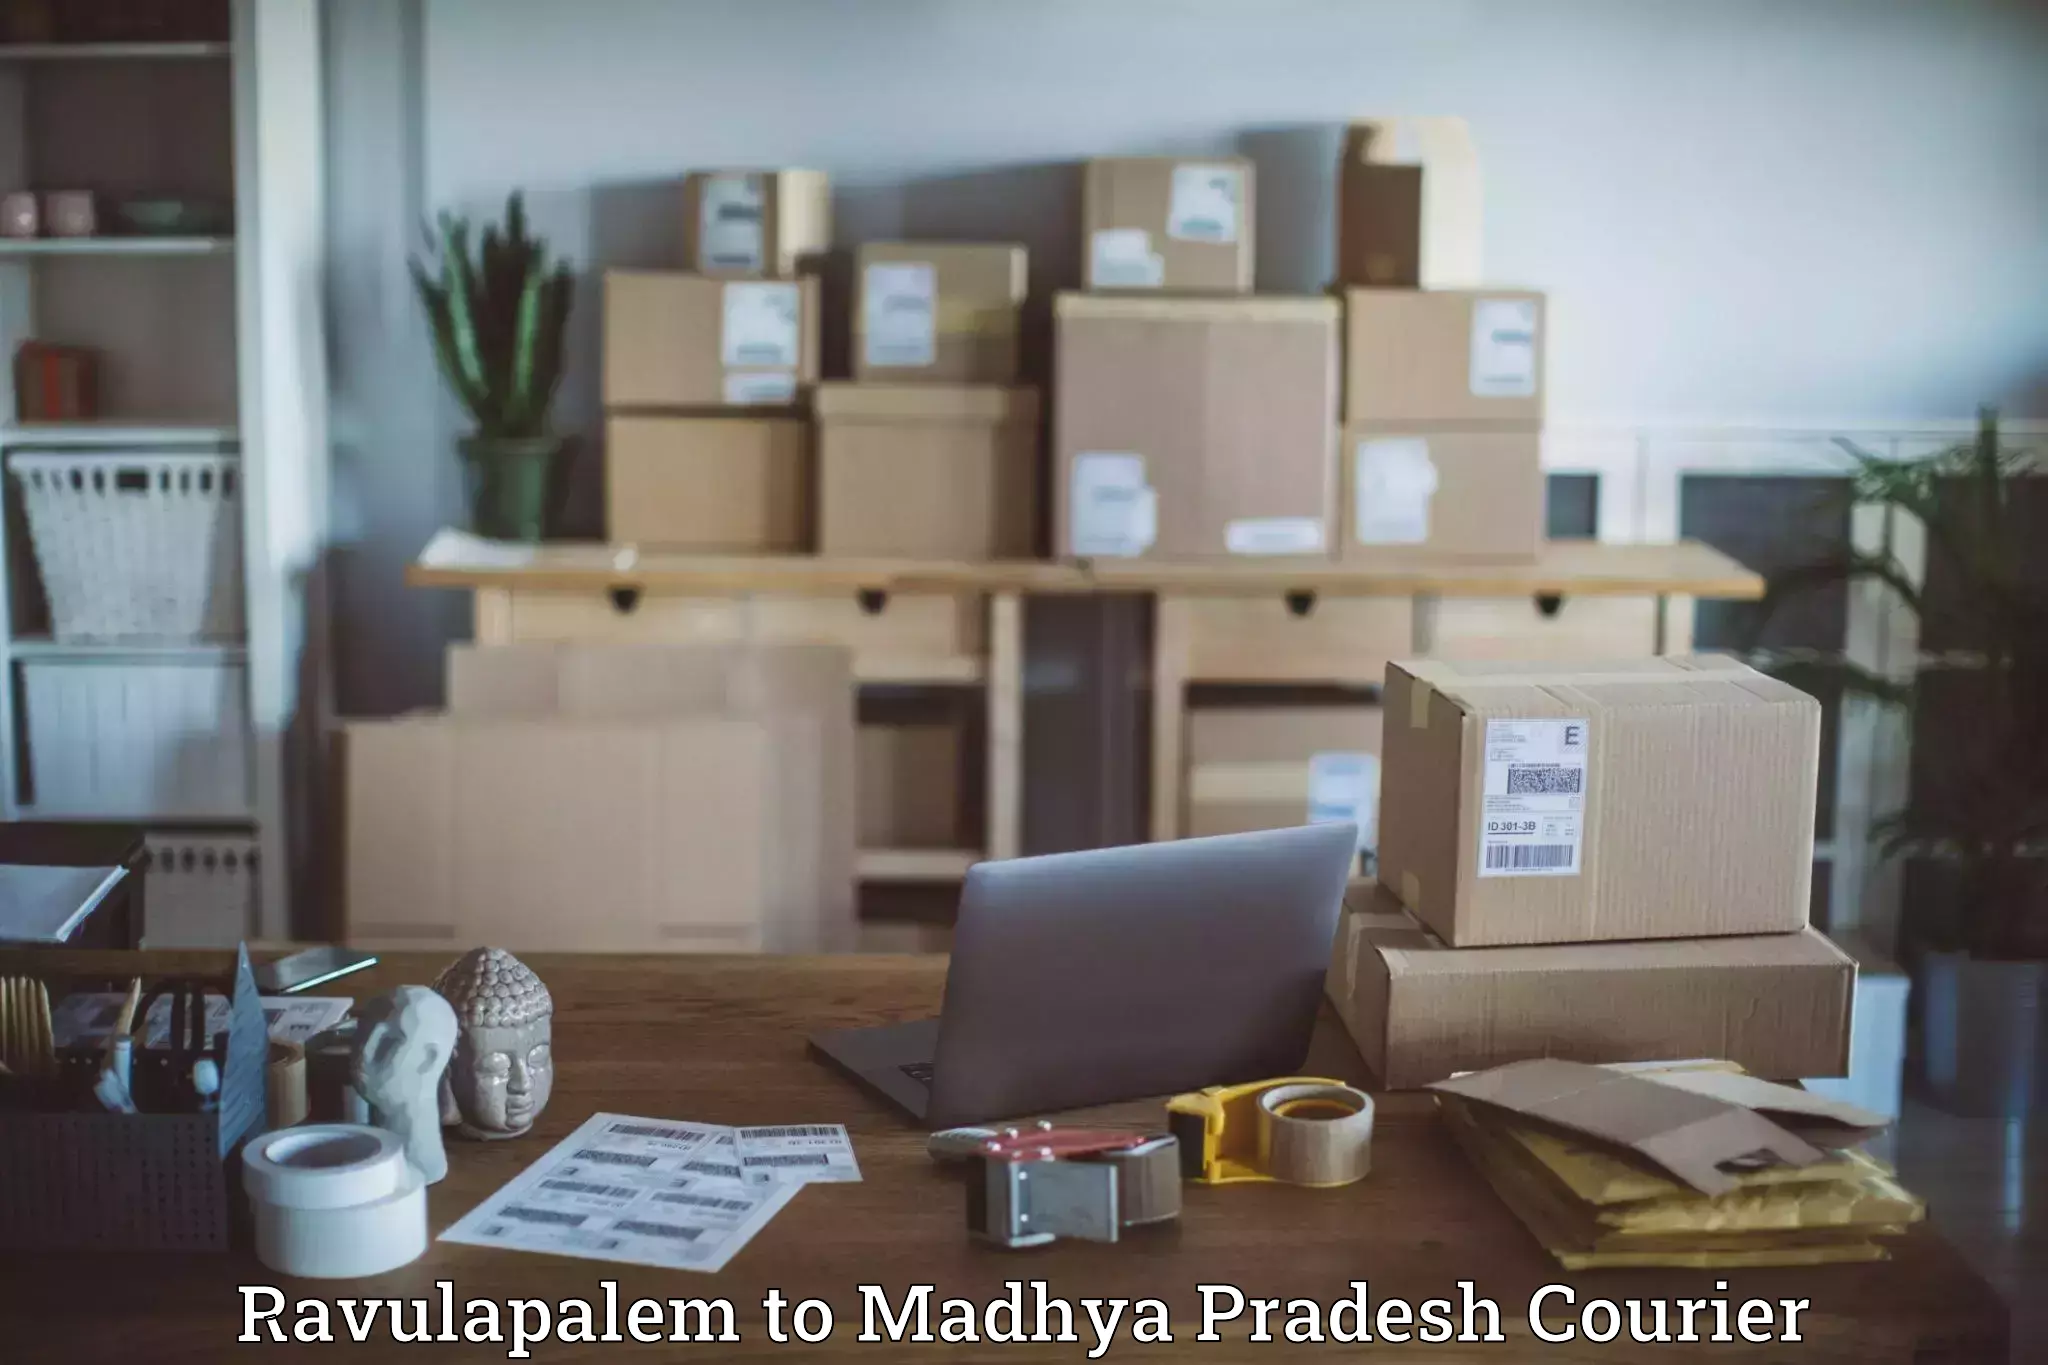 State-of-the-art courier technology Ravulapalem to Nagod